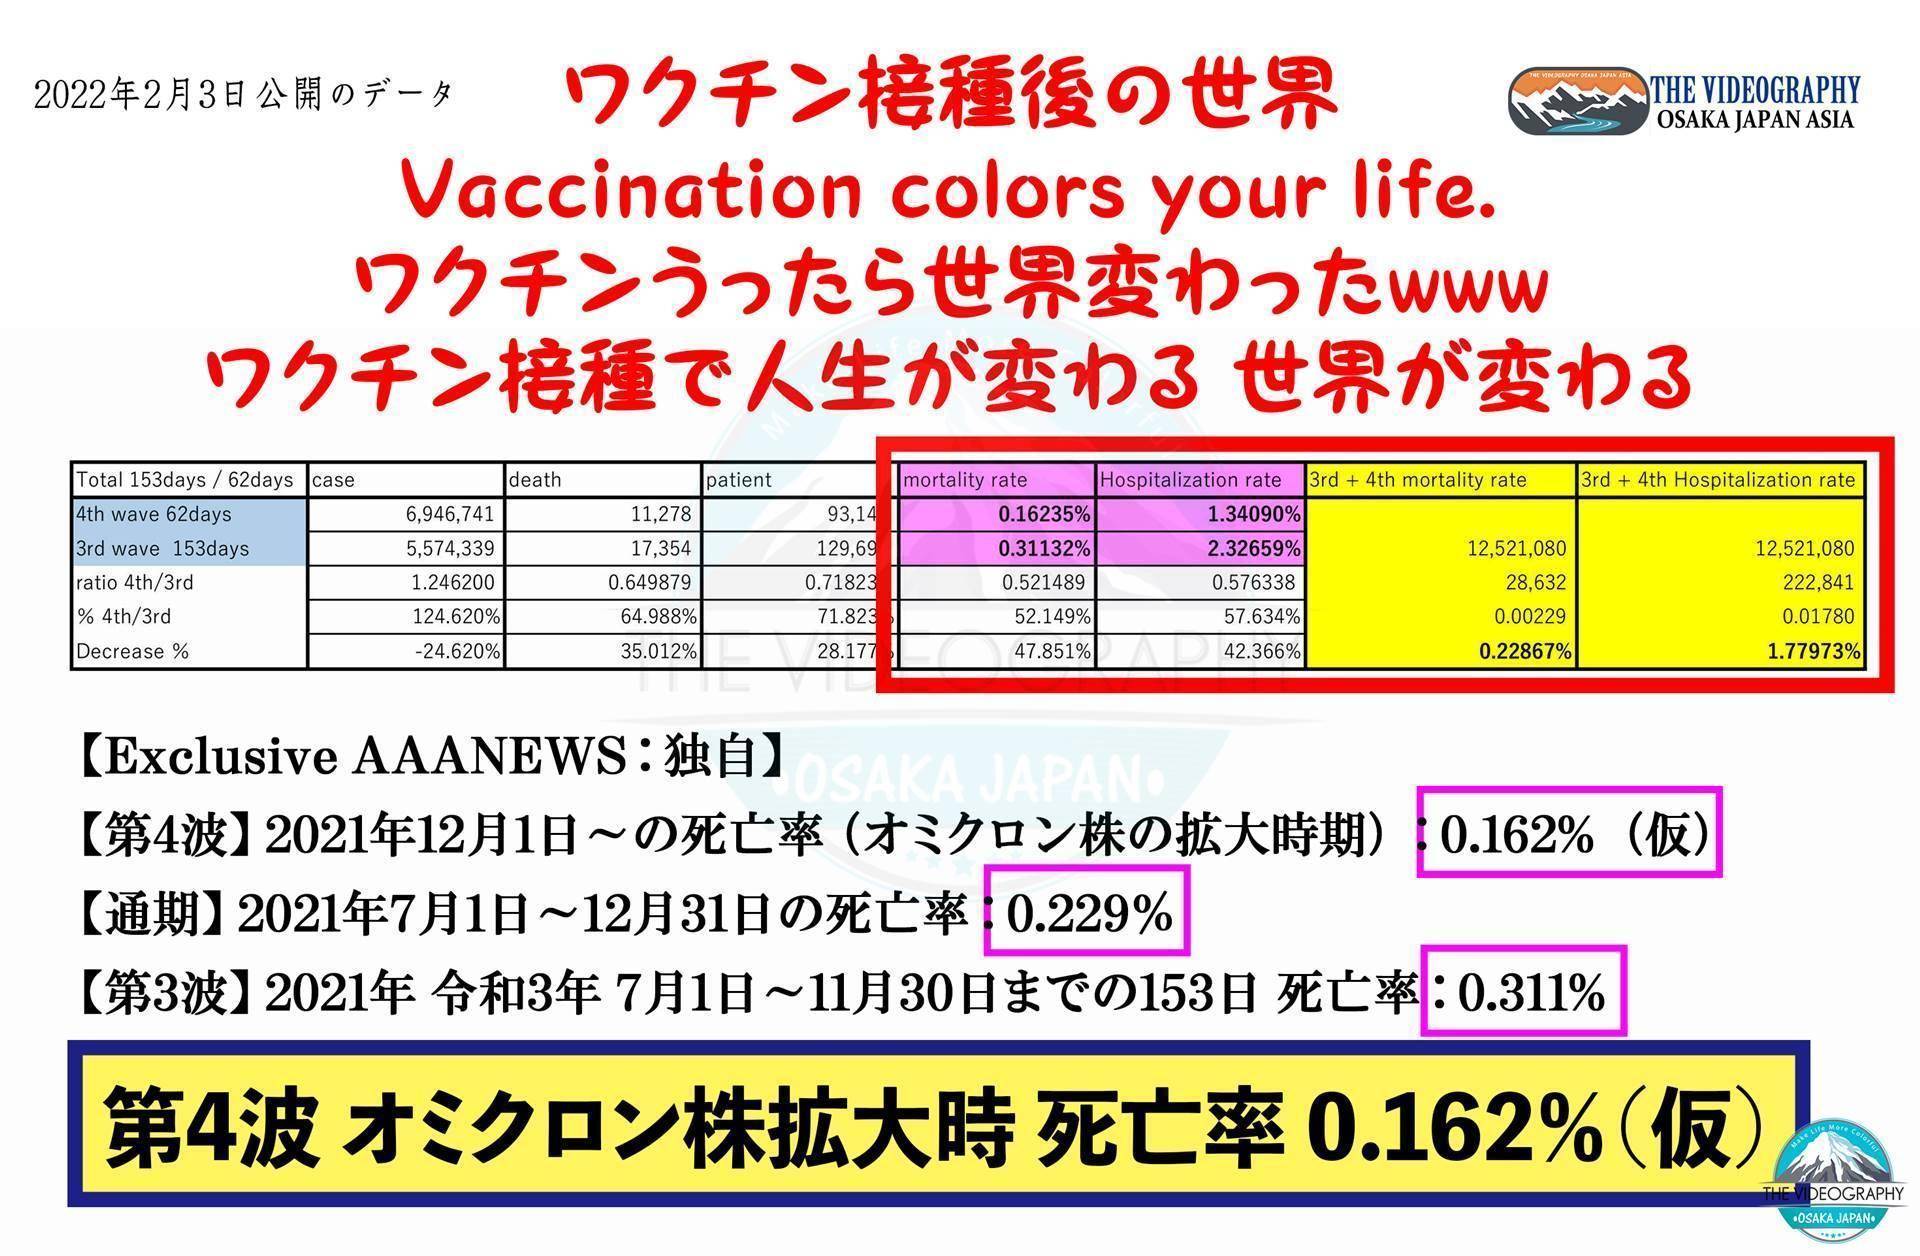 Mortality rate of COVID-19 / Omicron variant is 0.162% in 4th Wave（1st Dec 2021 - 31th Jan 2022）. https://videographyosaka.com/omicron-variant-third-fourth-wave-drastic-decrease-covid19-coronavirus-vaccination-deaths-hospitalization-united-kingdom/ Total 153days / 62days case death patient mortality rate Hospitalization rate 3rd + 4th mortality rate 3rd + 4th Hospitalization rate 4th wave 62days 6,946,741 11,278 93,149 0.16235% 1.34090% 3rd wave 153days 5,574,339 17,354 129,692 0.31132% 2.32659% 12,521,080 12,521,080 ratio 4th/3rd 1.246200 0.649879 0.718232 0.521489 0.576338 28,632 222,841 ％ 4th/3rd 124.620% 64.988% 71.823% 52.149% 57.634% 0.00229 0.01780 Decrease ％ -24.620% 35.012% 28.177% 47.851% 42.366% 0.22867% 1.77973%